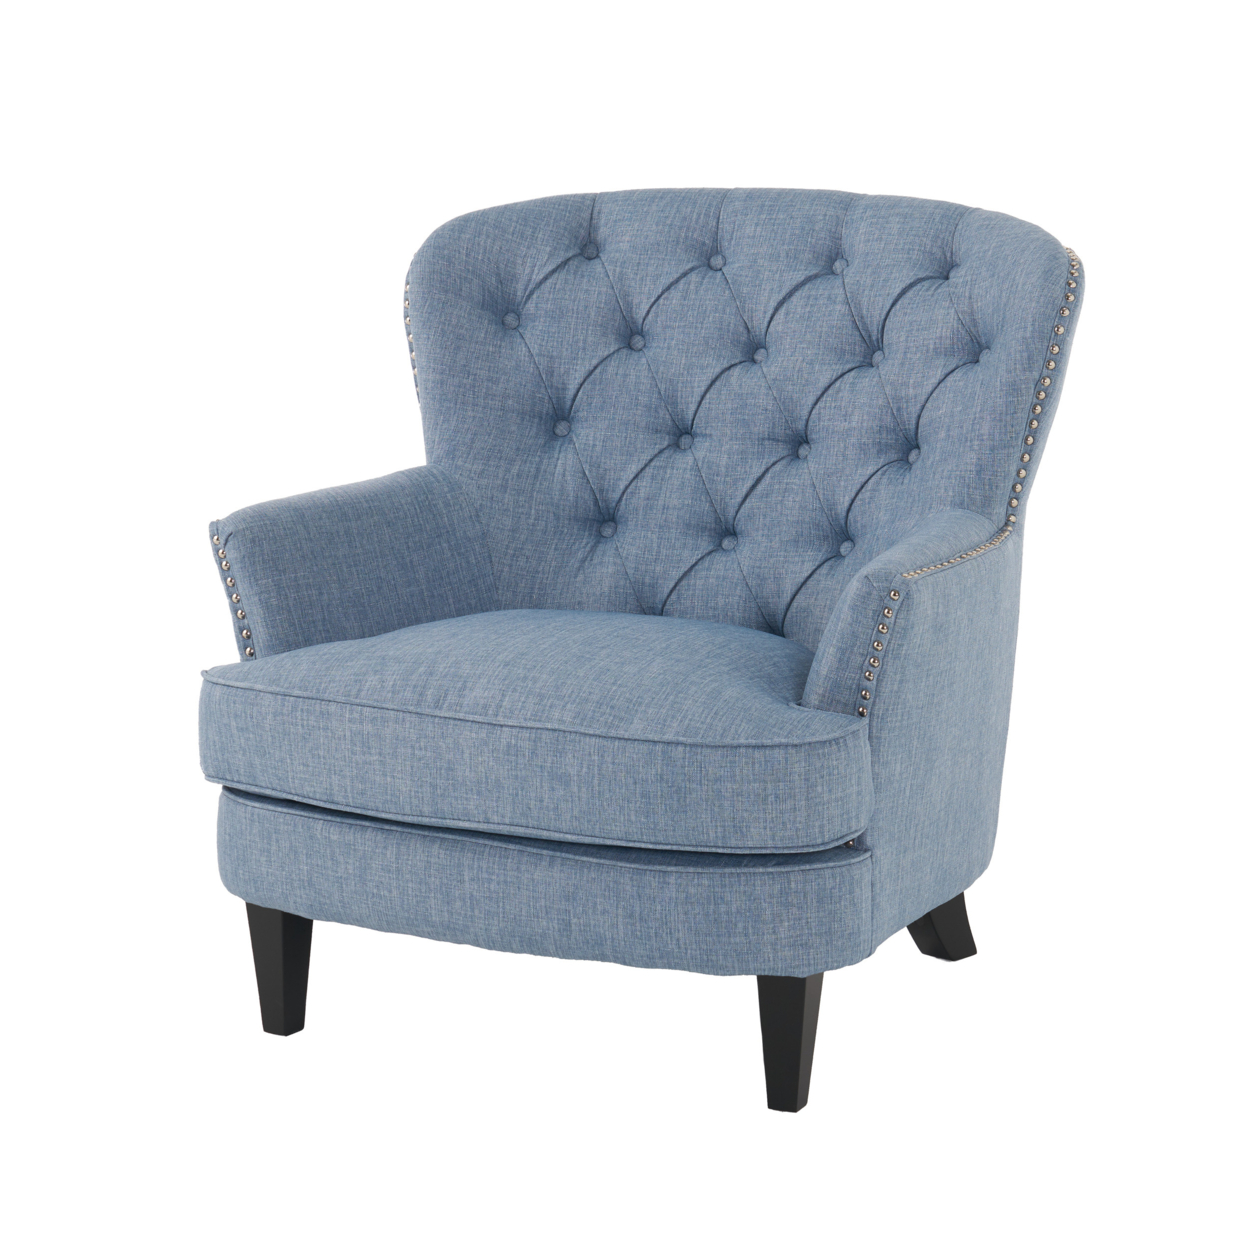 Laxford Upholstered Club Chair - Light Blue, Fabric